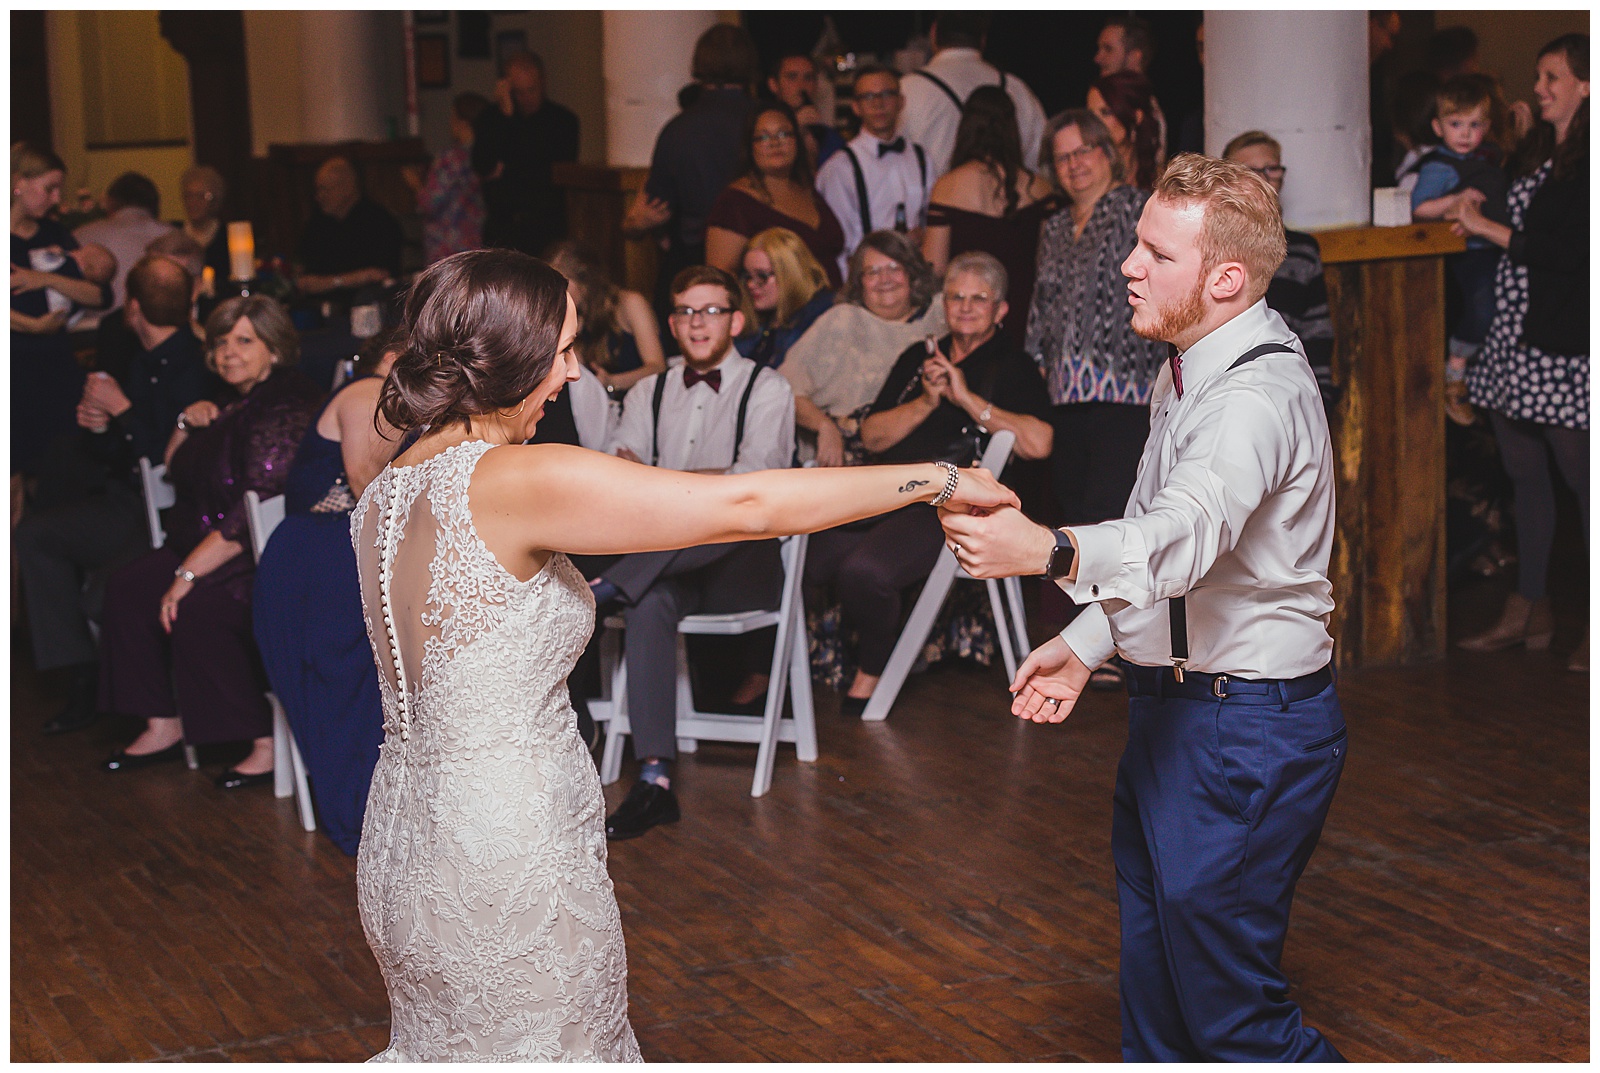 Wedding photography at Rumely Event Space by Kansas City wedding photographers Wisdom-Watson Weddings.